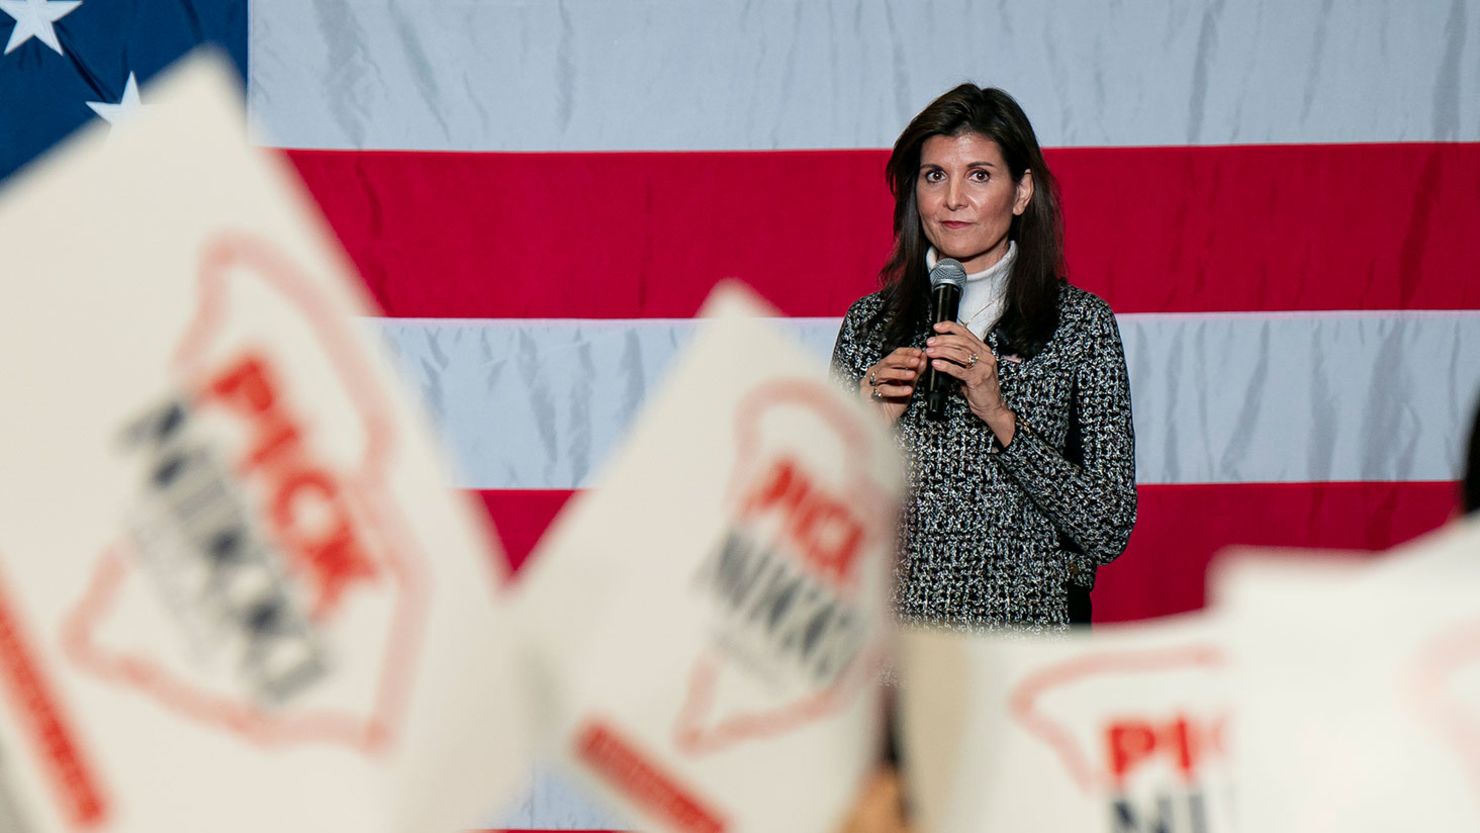 Nikki Haley speaks at a rally on January 28, in Conway, South Carolina.